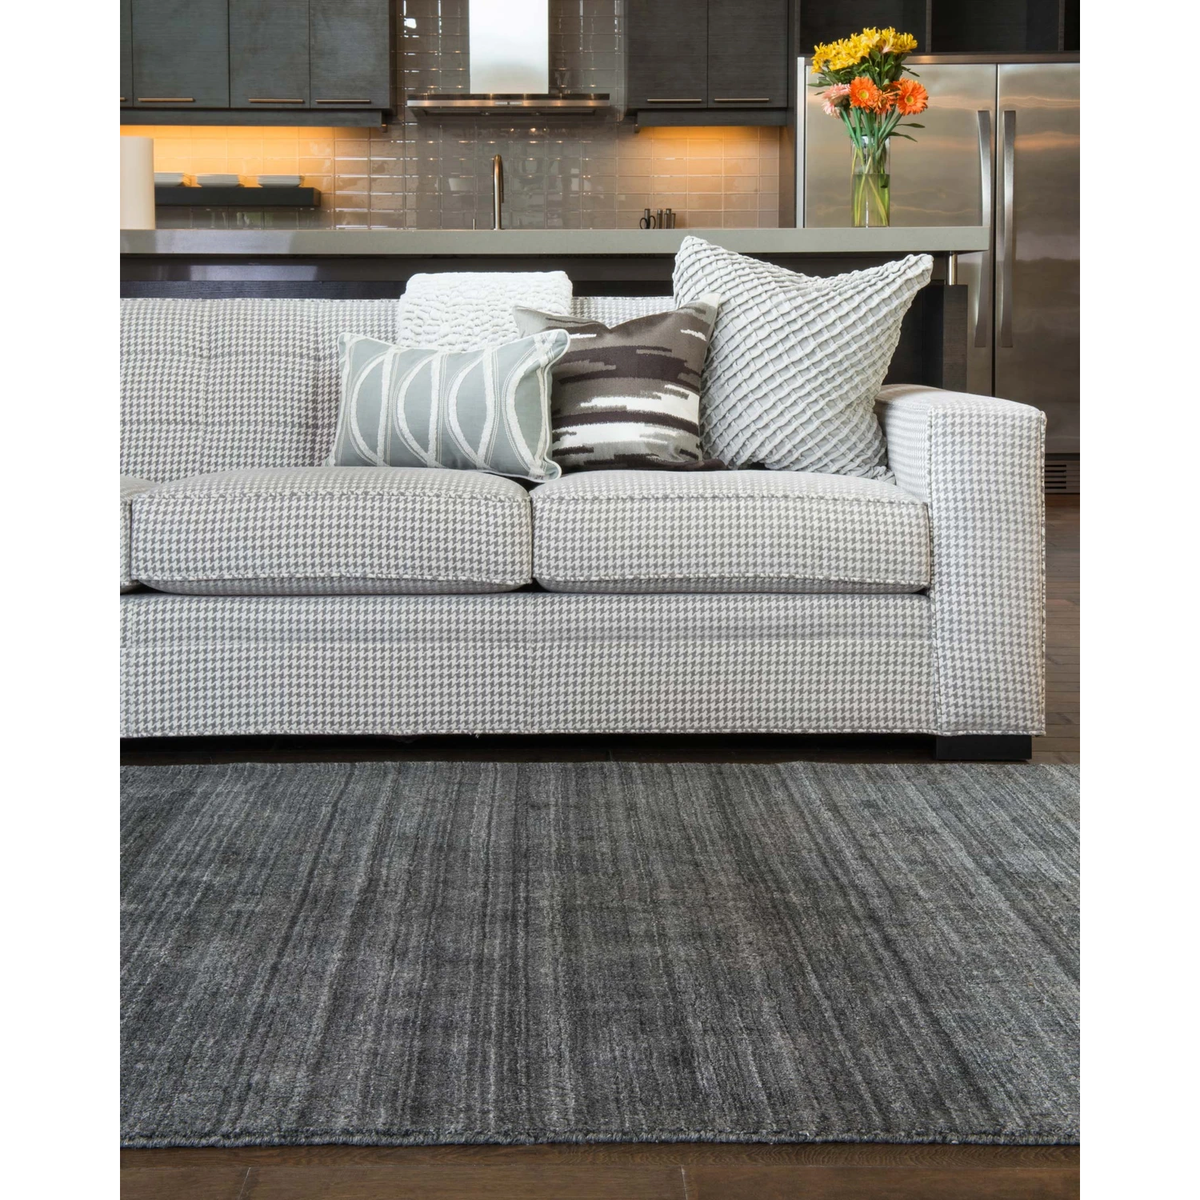 Barkley Rugs by Loloi - BK-01 - Charcoal-Loloi Rugs-Blue Hand Home